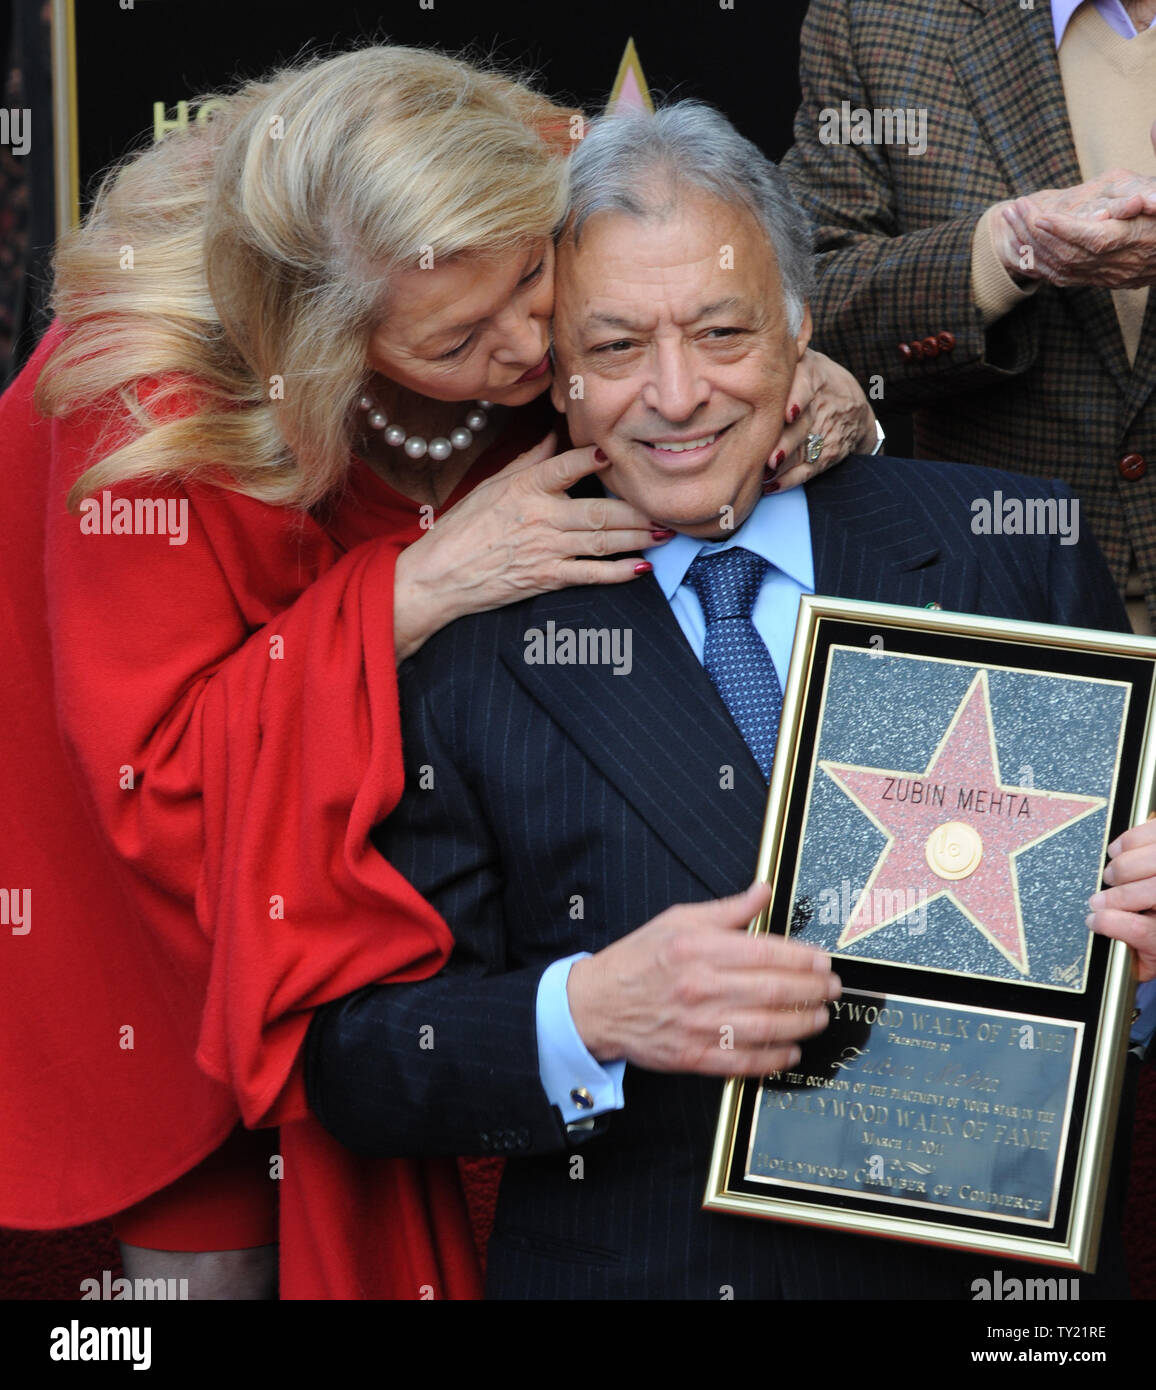 International orchestral and operatic conductor Zubin Mehta (C) is kissed by his wife Nancy (L) during ceremonies honoring Mehta with the 2,434th star on the Hollywood Walk of Fame in Los Angeles on March 1, 2011. Members of the Los Angeles, Israel and Vienna Philharmonic Orchestras performed at the event.  UPI/Jim Ruymen Stock Photo